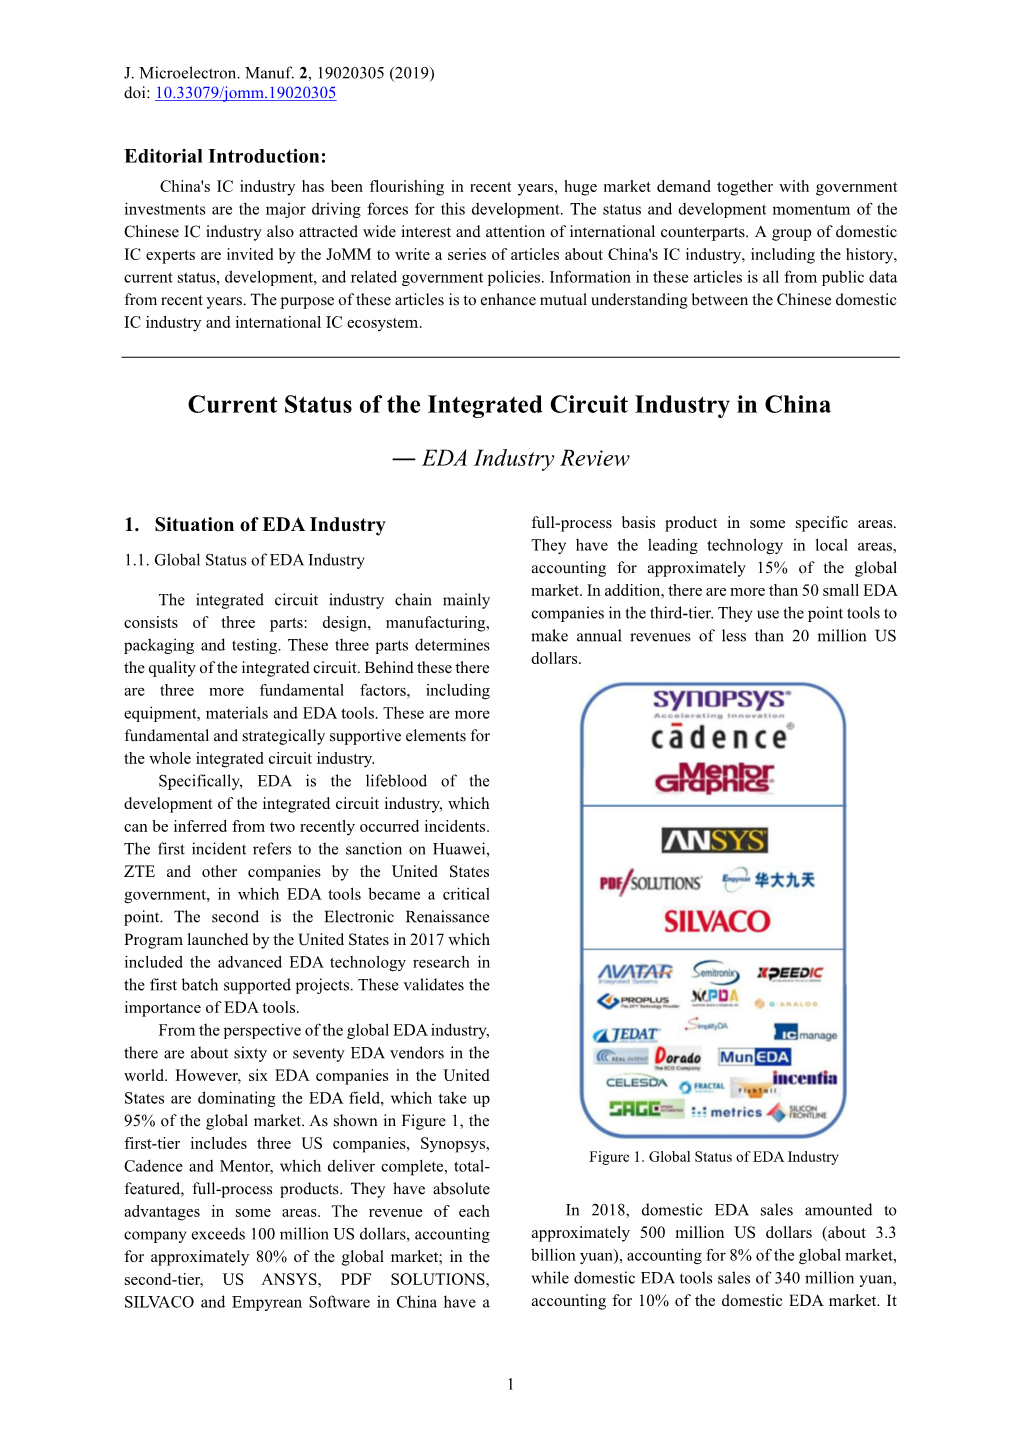 Current Status of the Integrated Circuit Industry in China